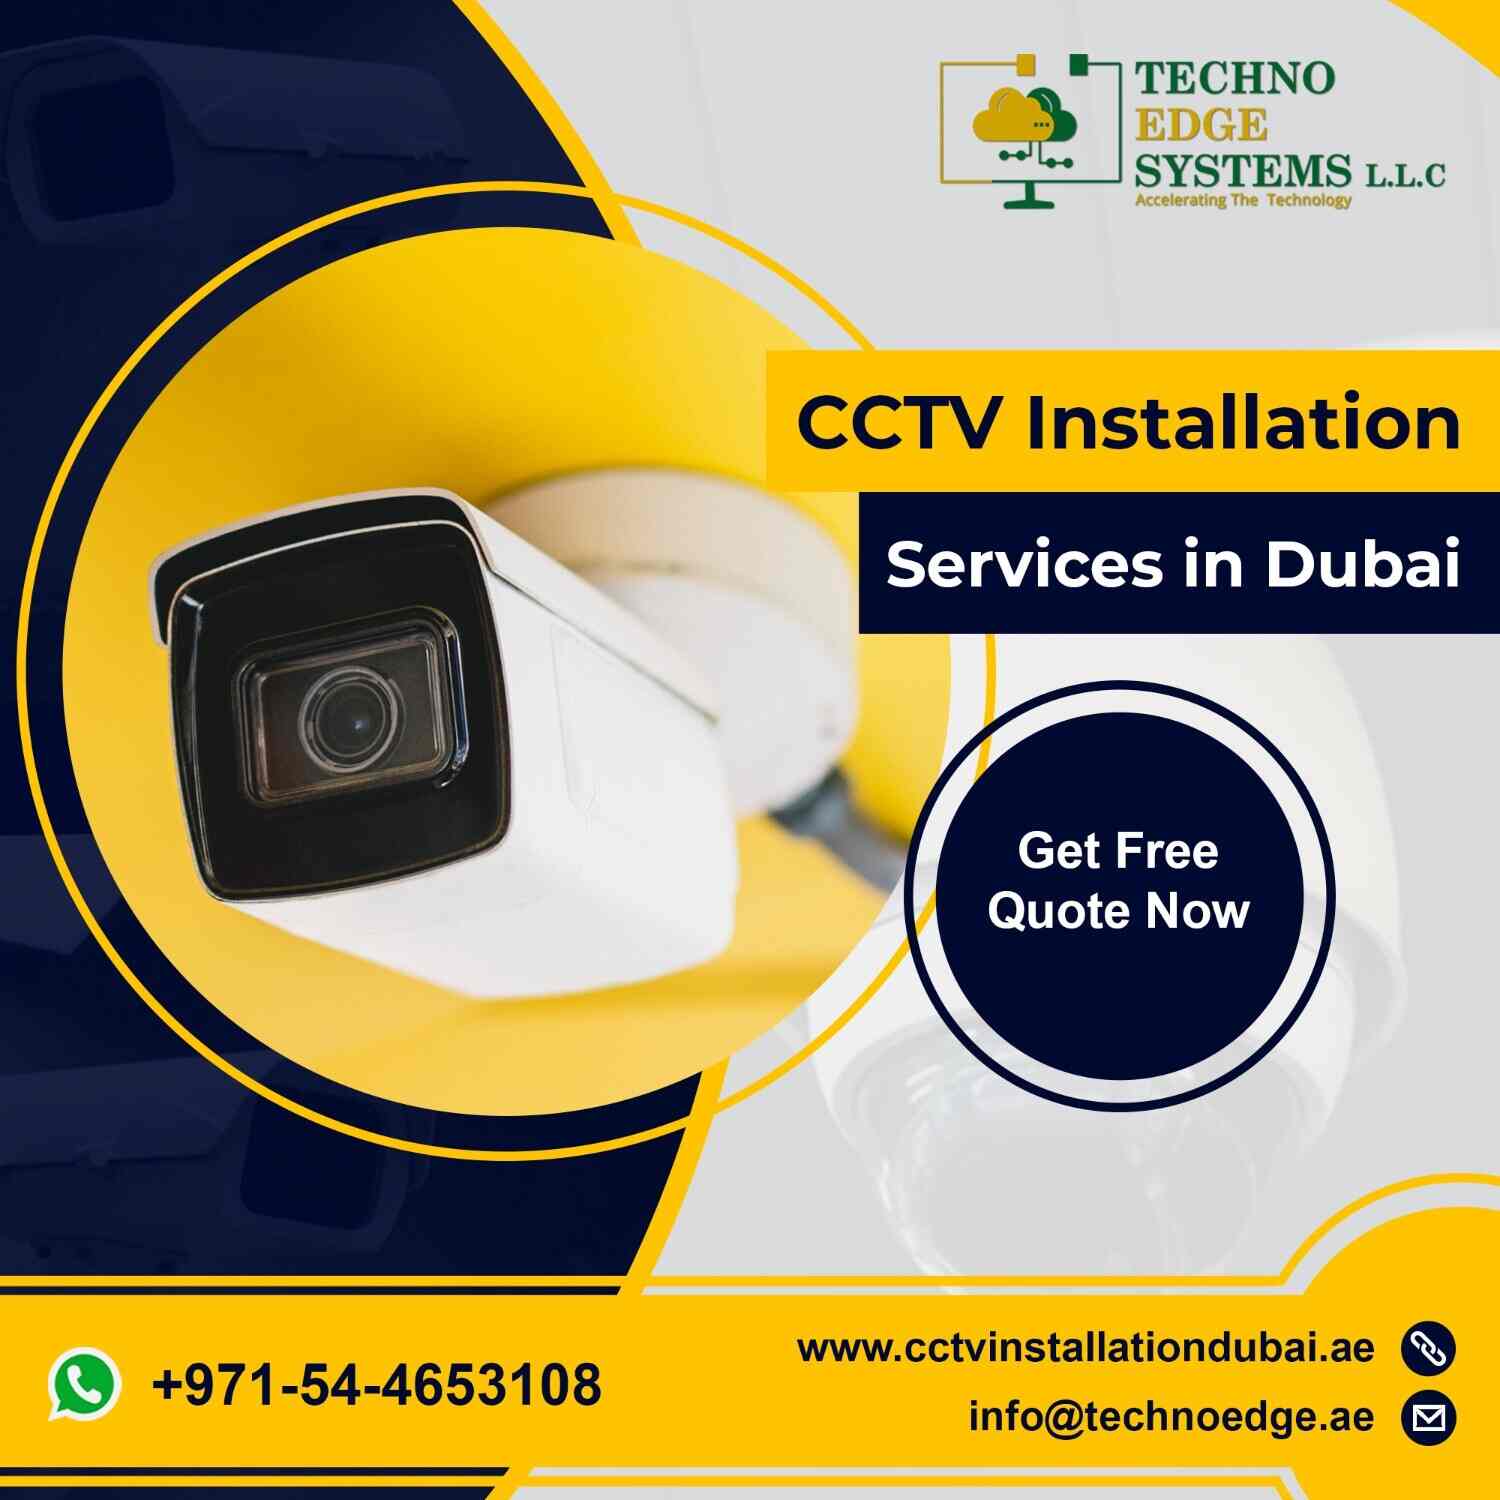 Why Is Cctv Installation Important In Dubai Businesses